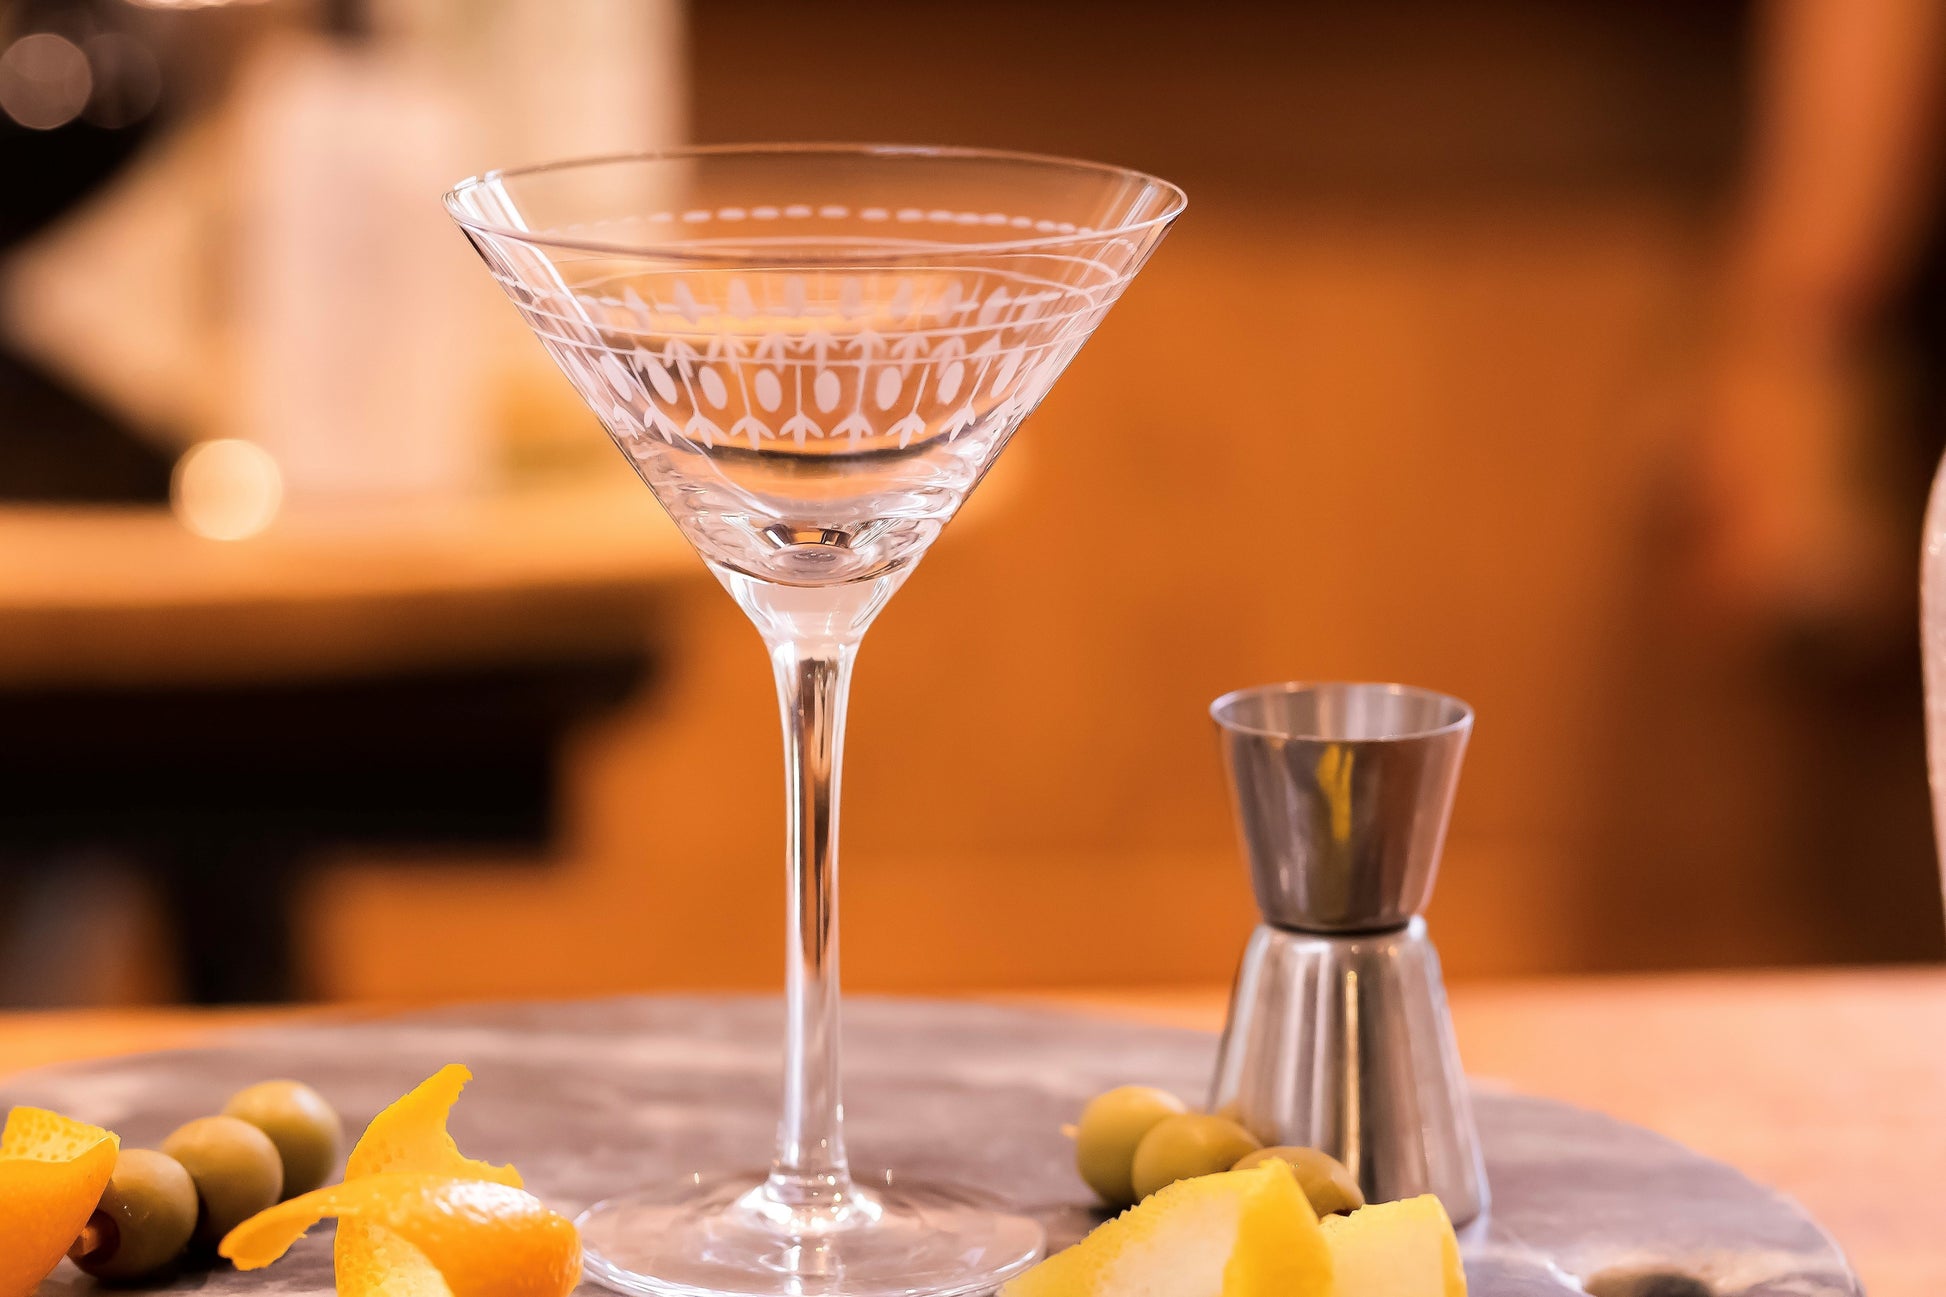 A classic martini glass hand etched with a delicate ovals pattern.  There are some olives and orange peel in the background.